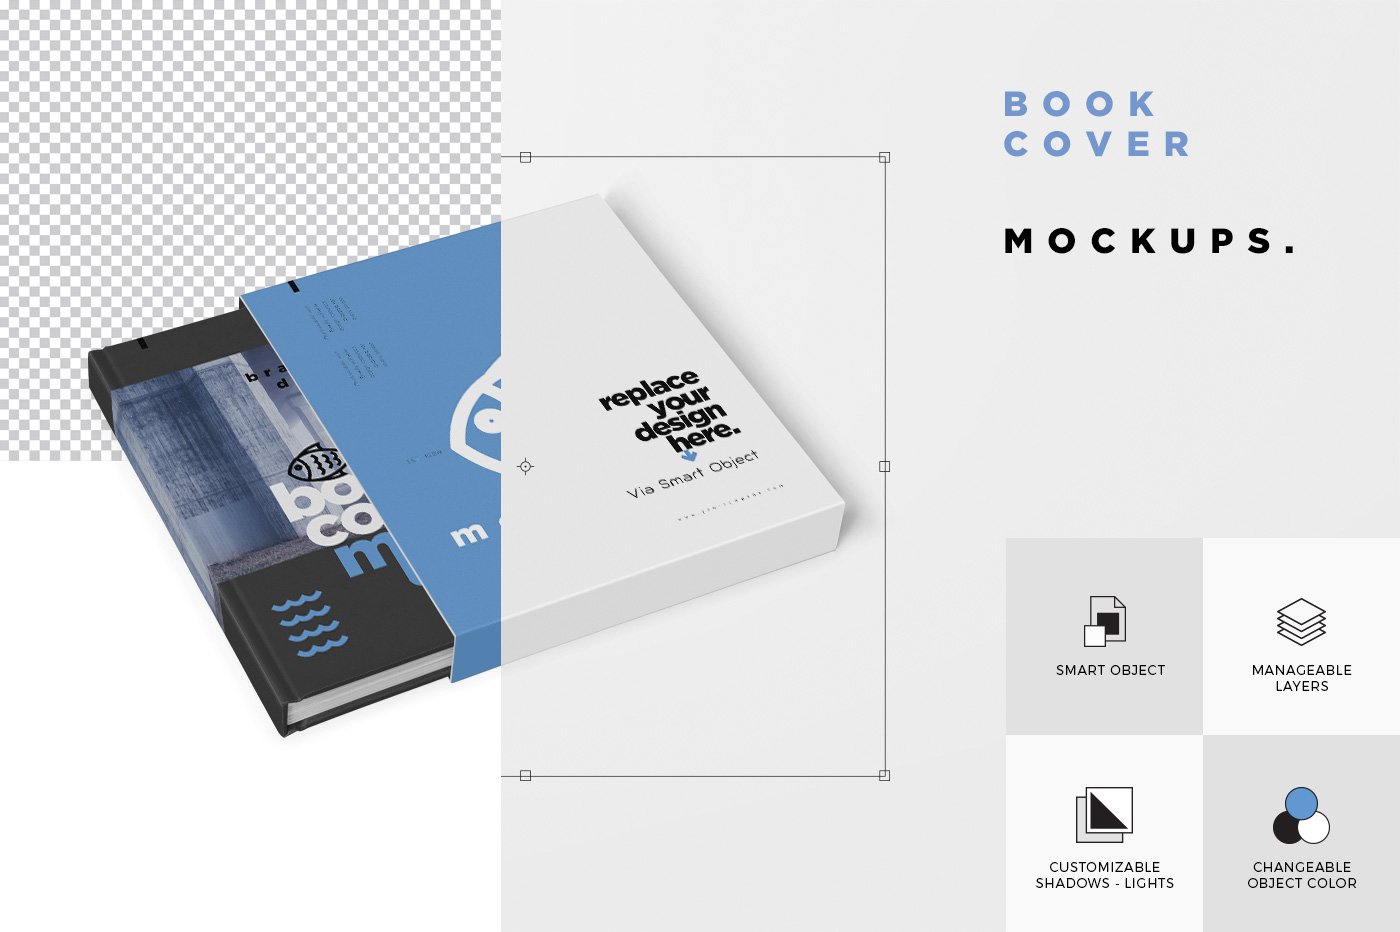 mockup features image 797